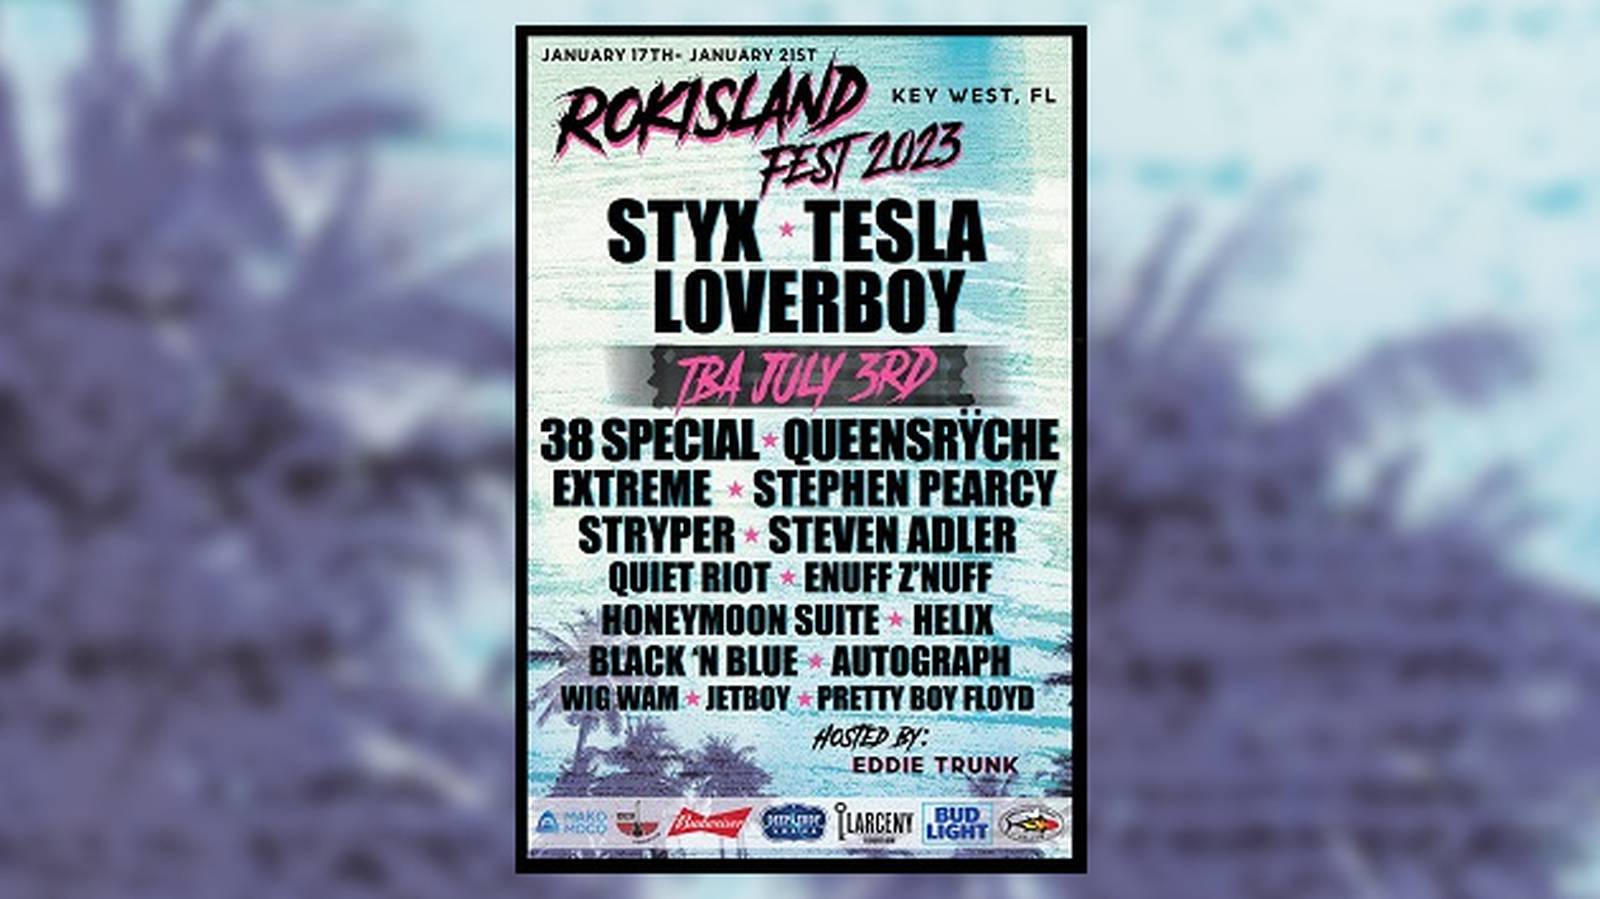 Styx, Loverboy, Tesla among many bands performing at RockIsland Fest